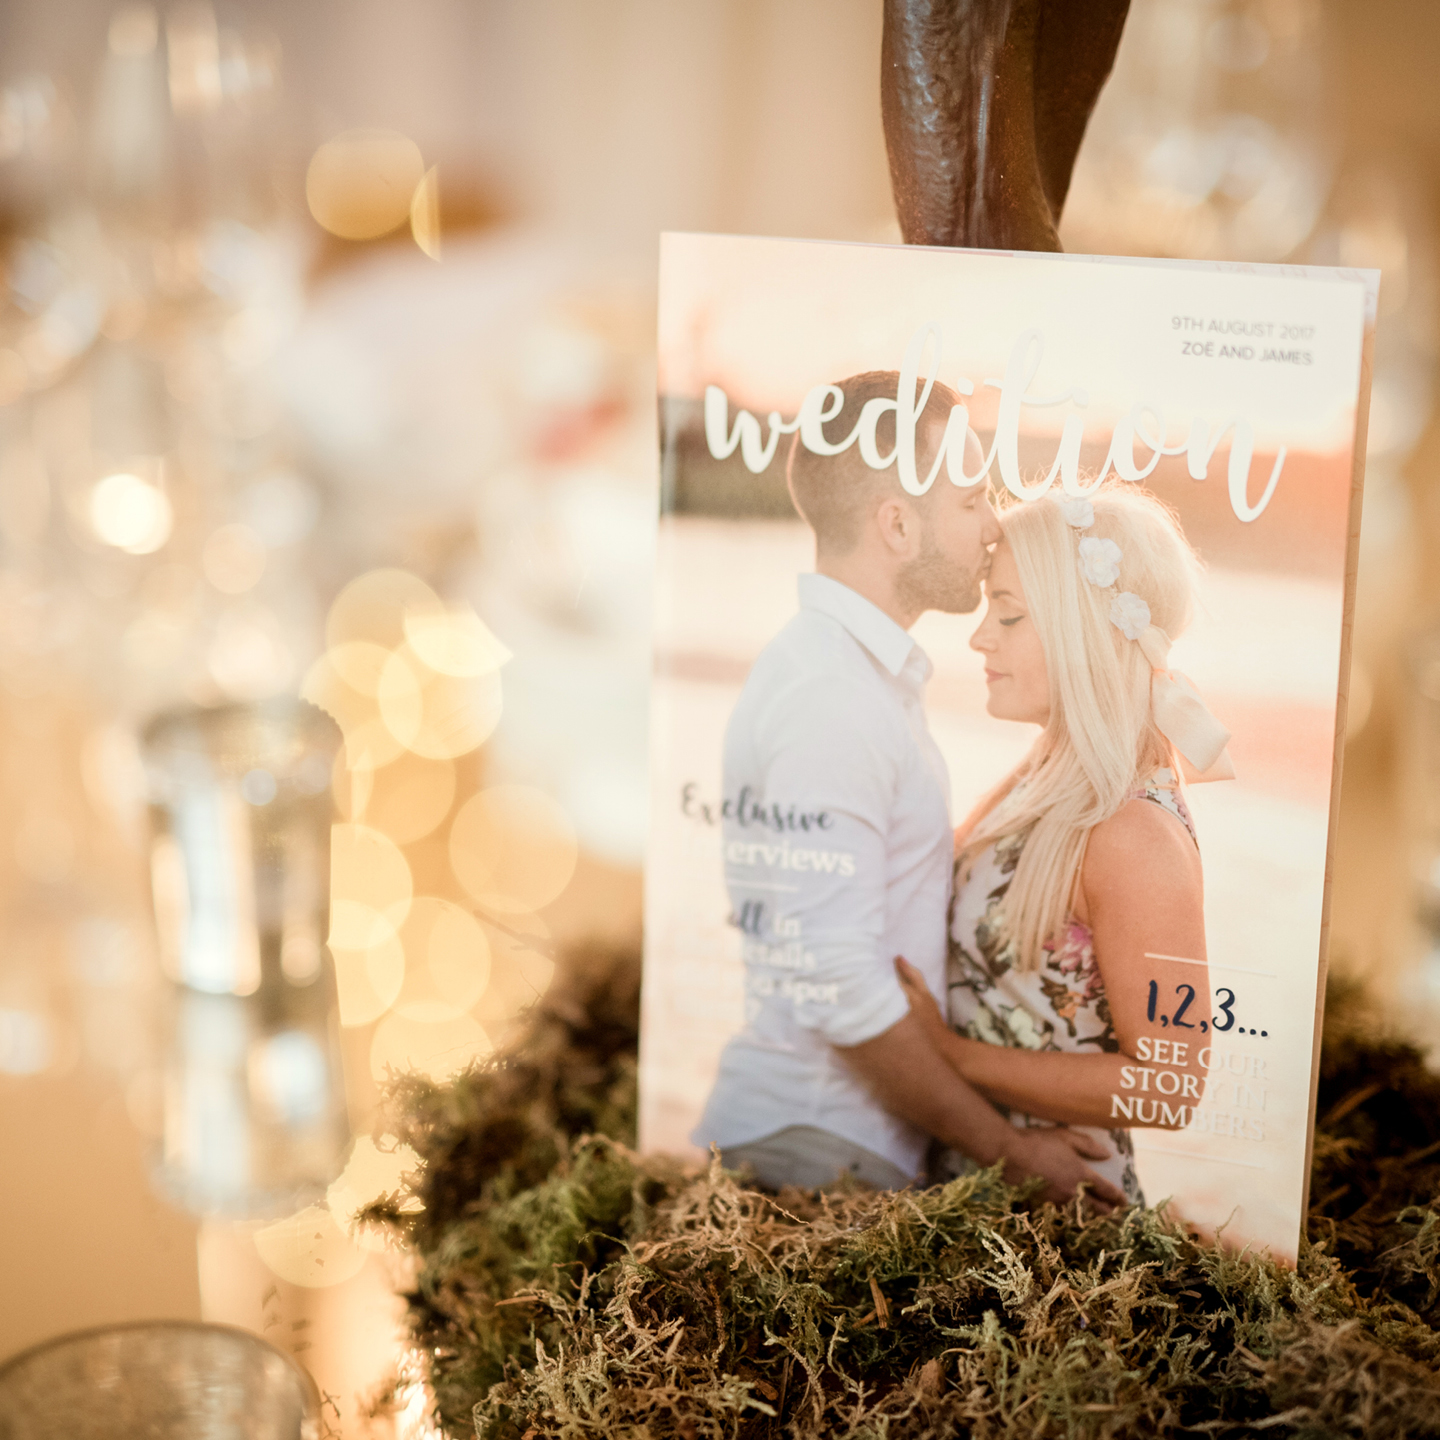 Waddesdon recommended wedding supplier Wedition